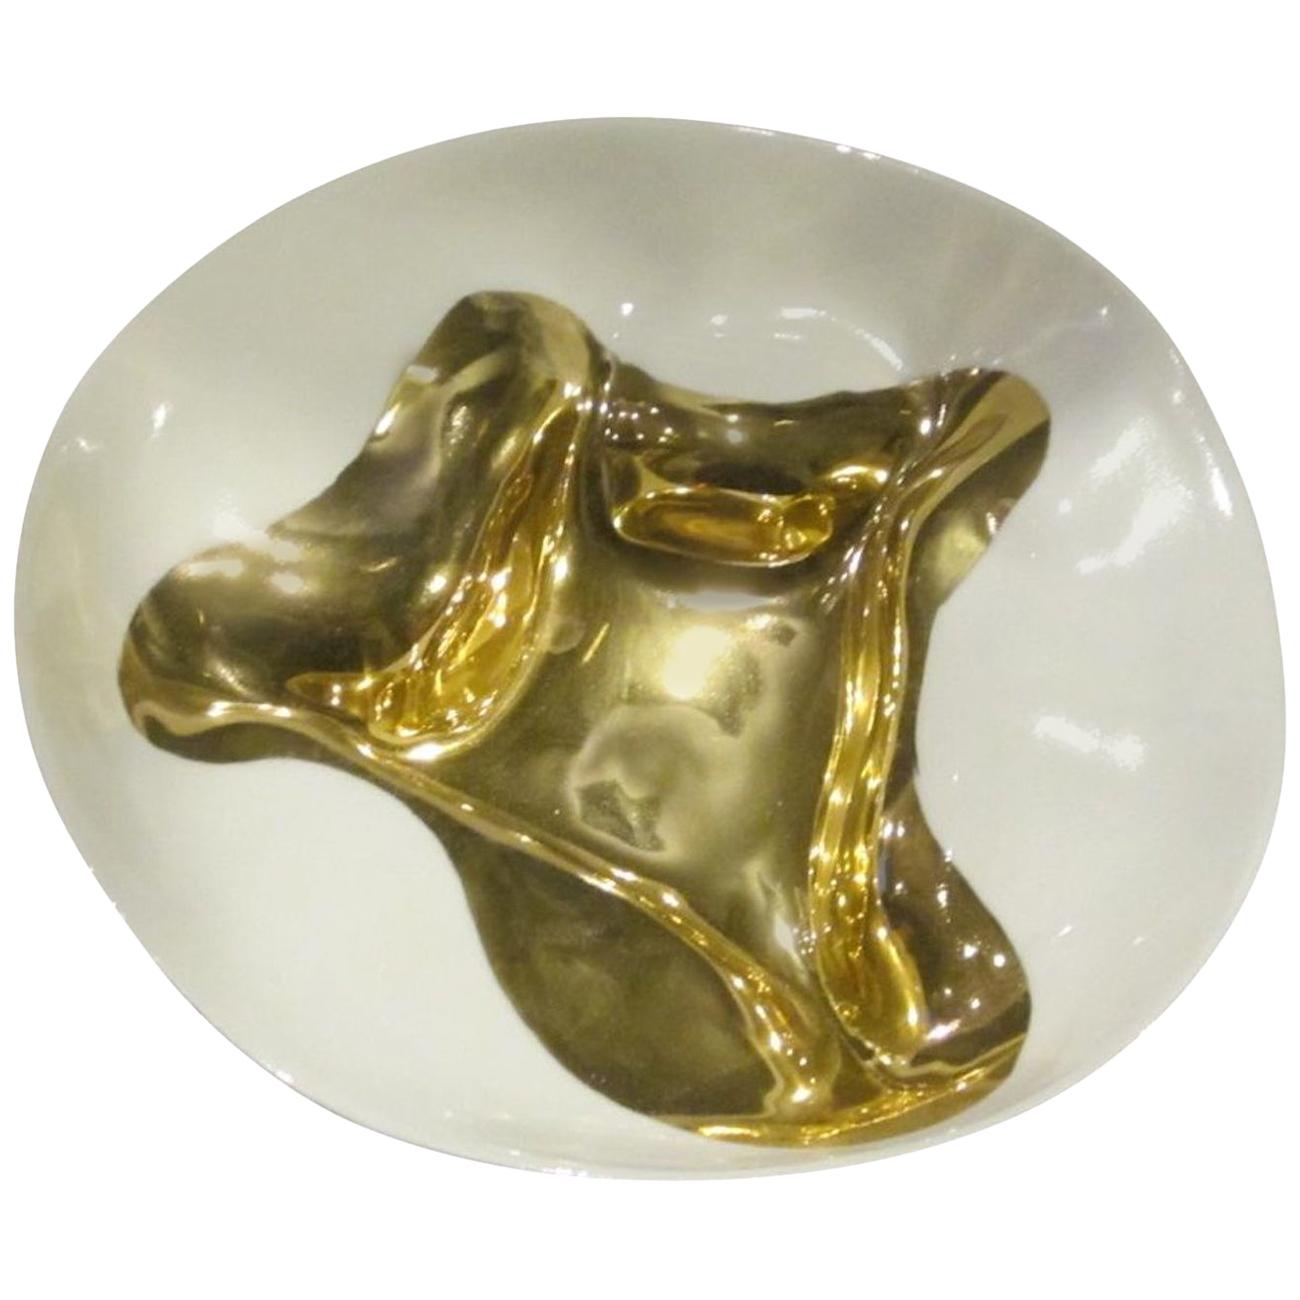 Contemporary Italian handmade gold leaf accented bowl.
freeform organic shape.
Fine ceramic base.
Similar bowls are available in 7